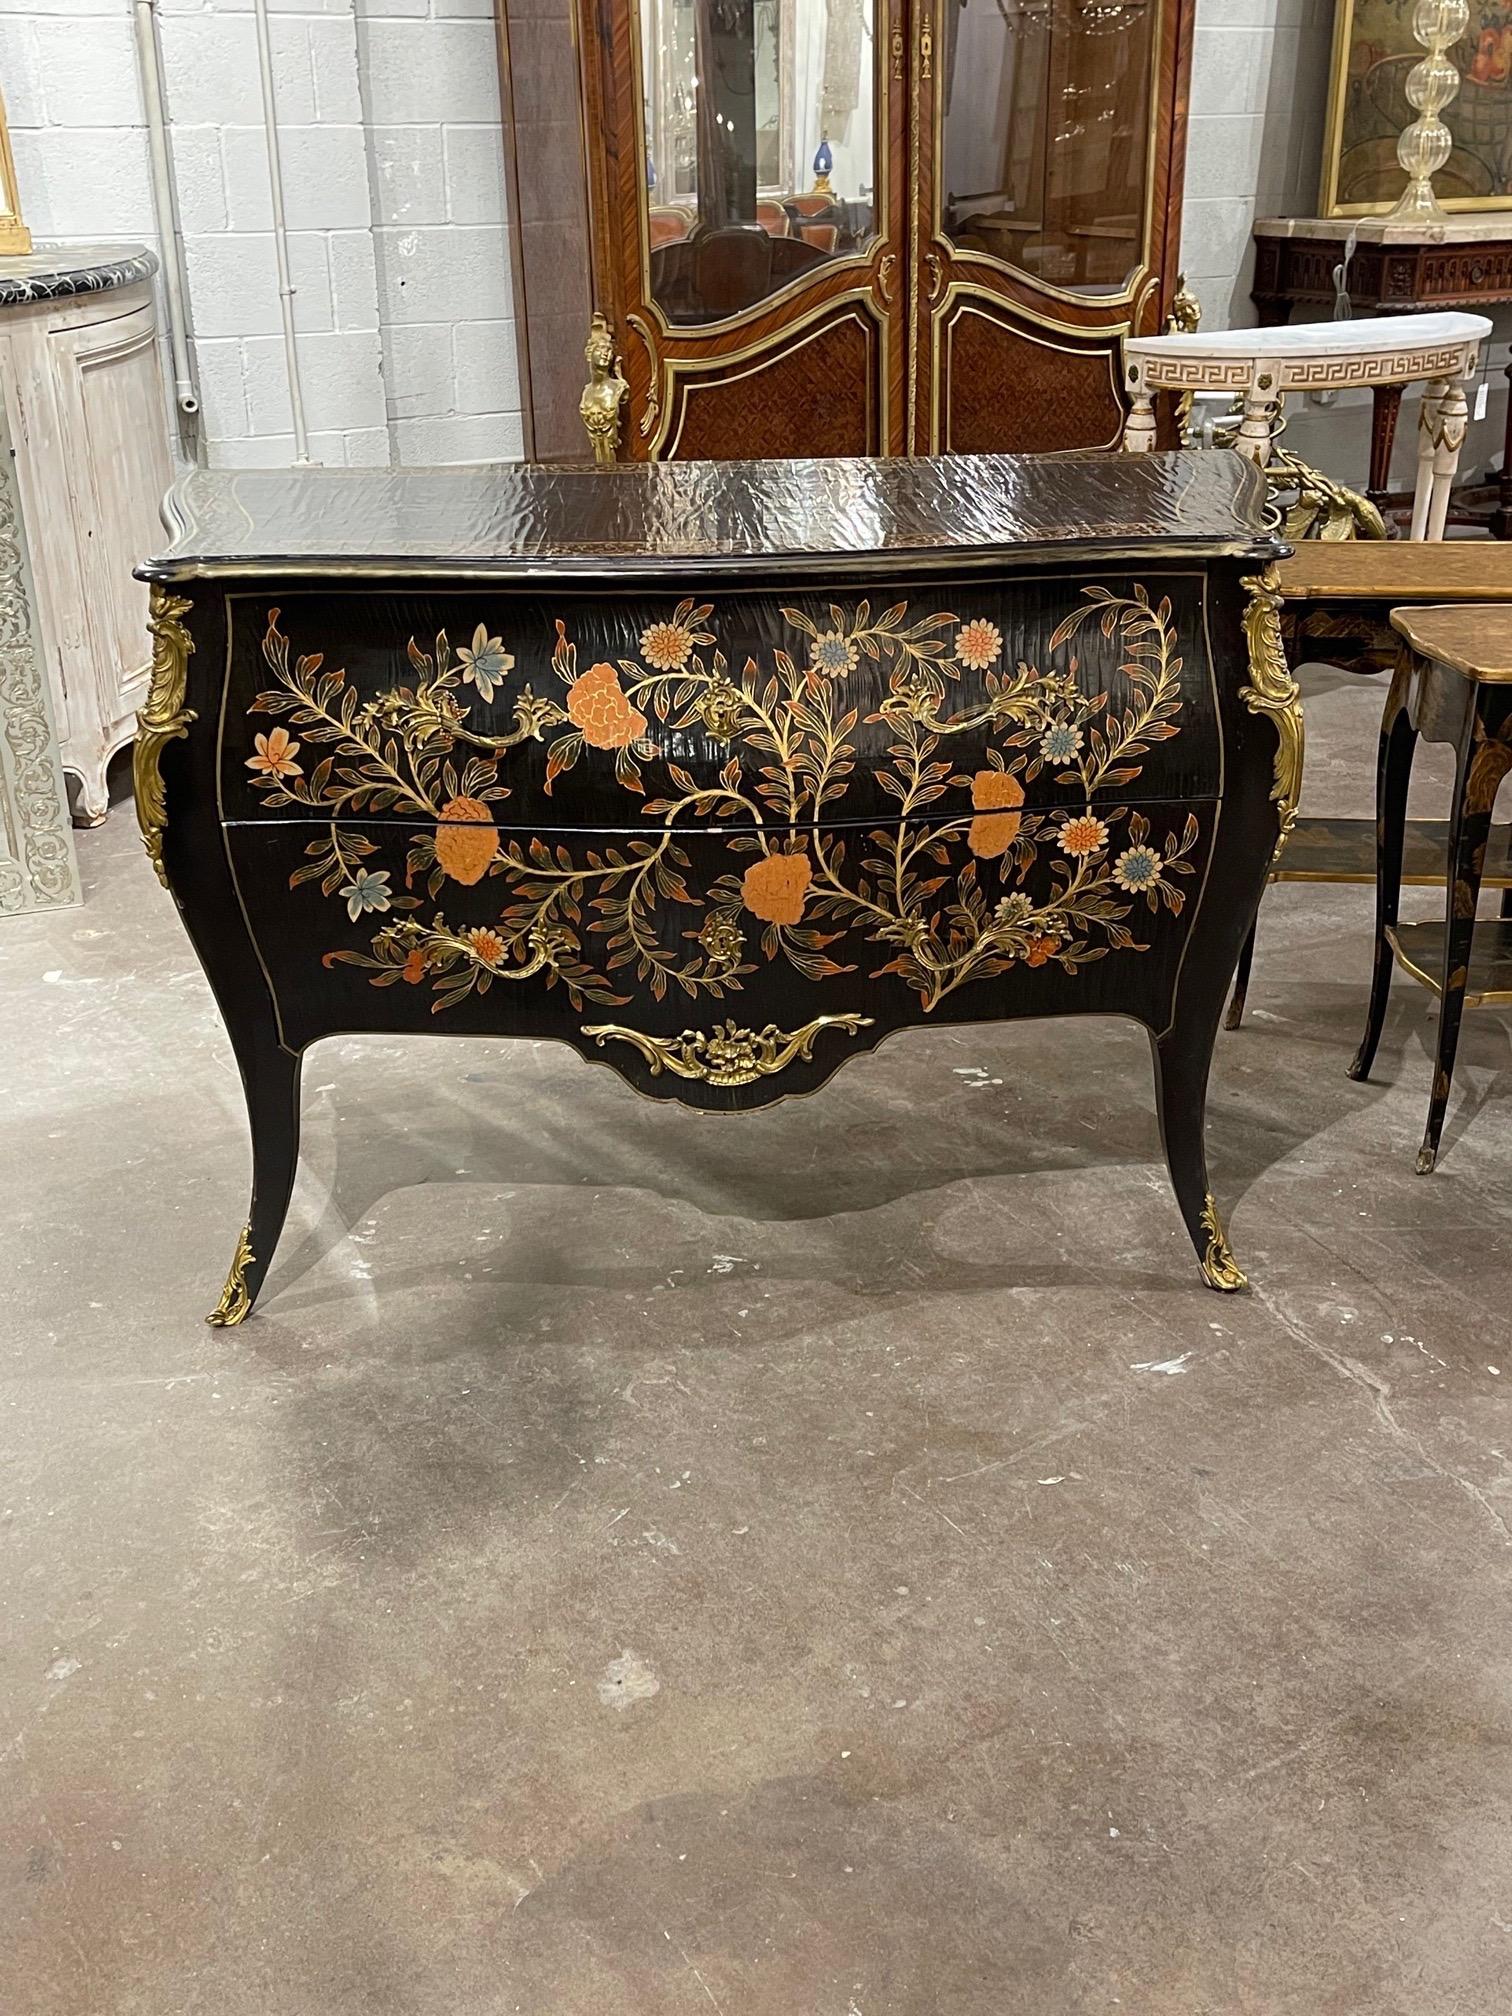 Exquisite French Louis XV style bombe hand painted commode. The piece is painted in a black lacquer along with a beautiful floral design. An amazing work of art!